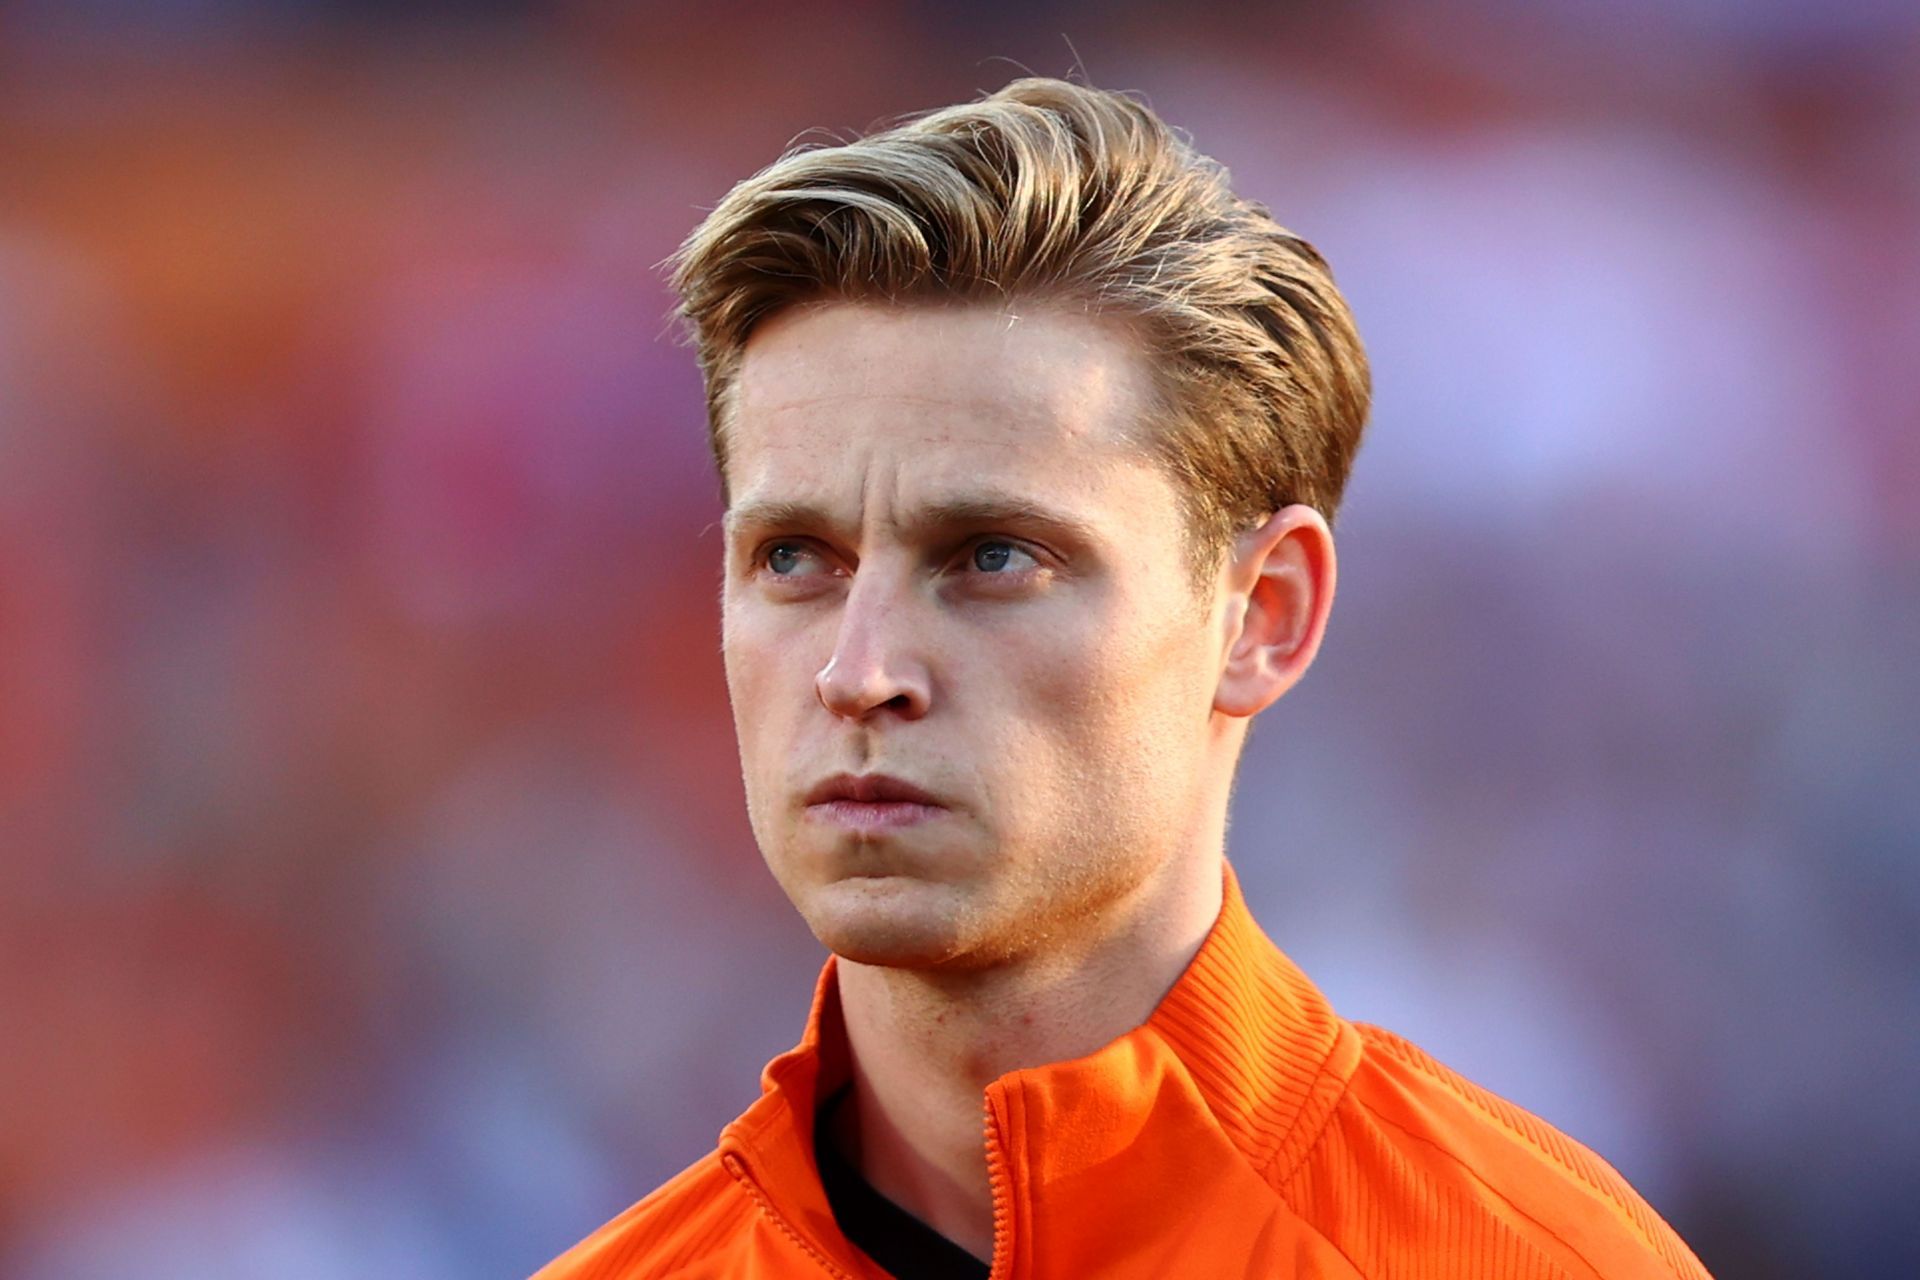 Frenkie de Jong has been heavily linked with a move to Stamford Bridge.